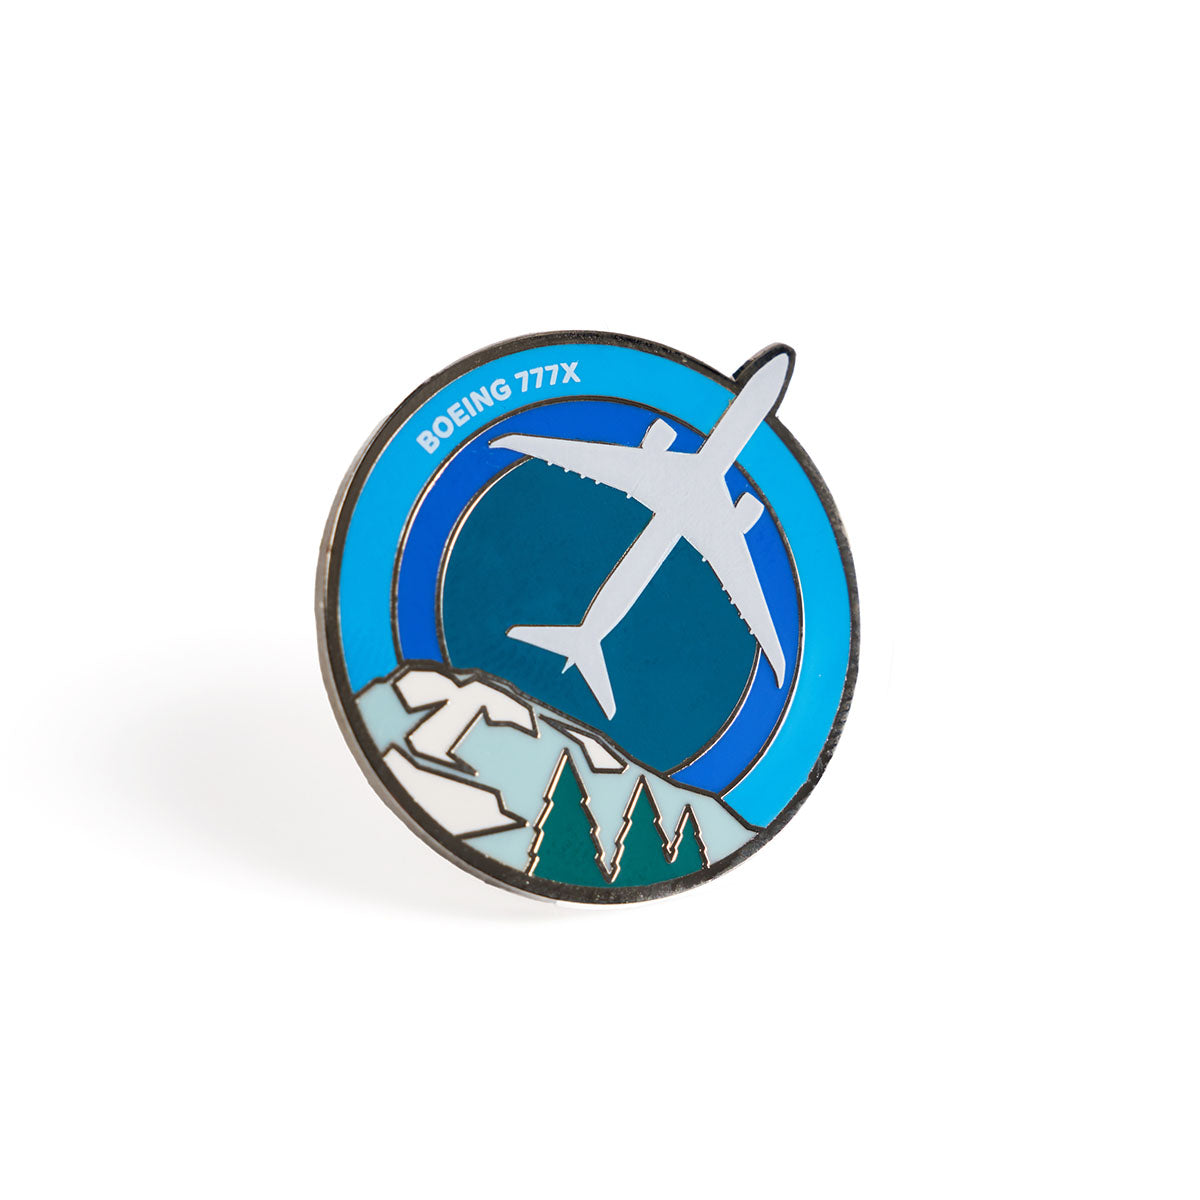  Skyward lapel pin, featuring the iconic Boeing 777X in an enamel roundel design. 